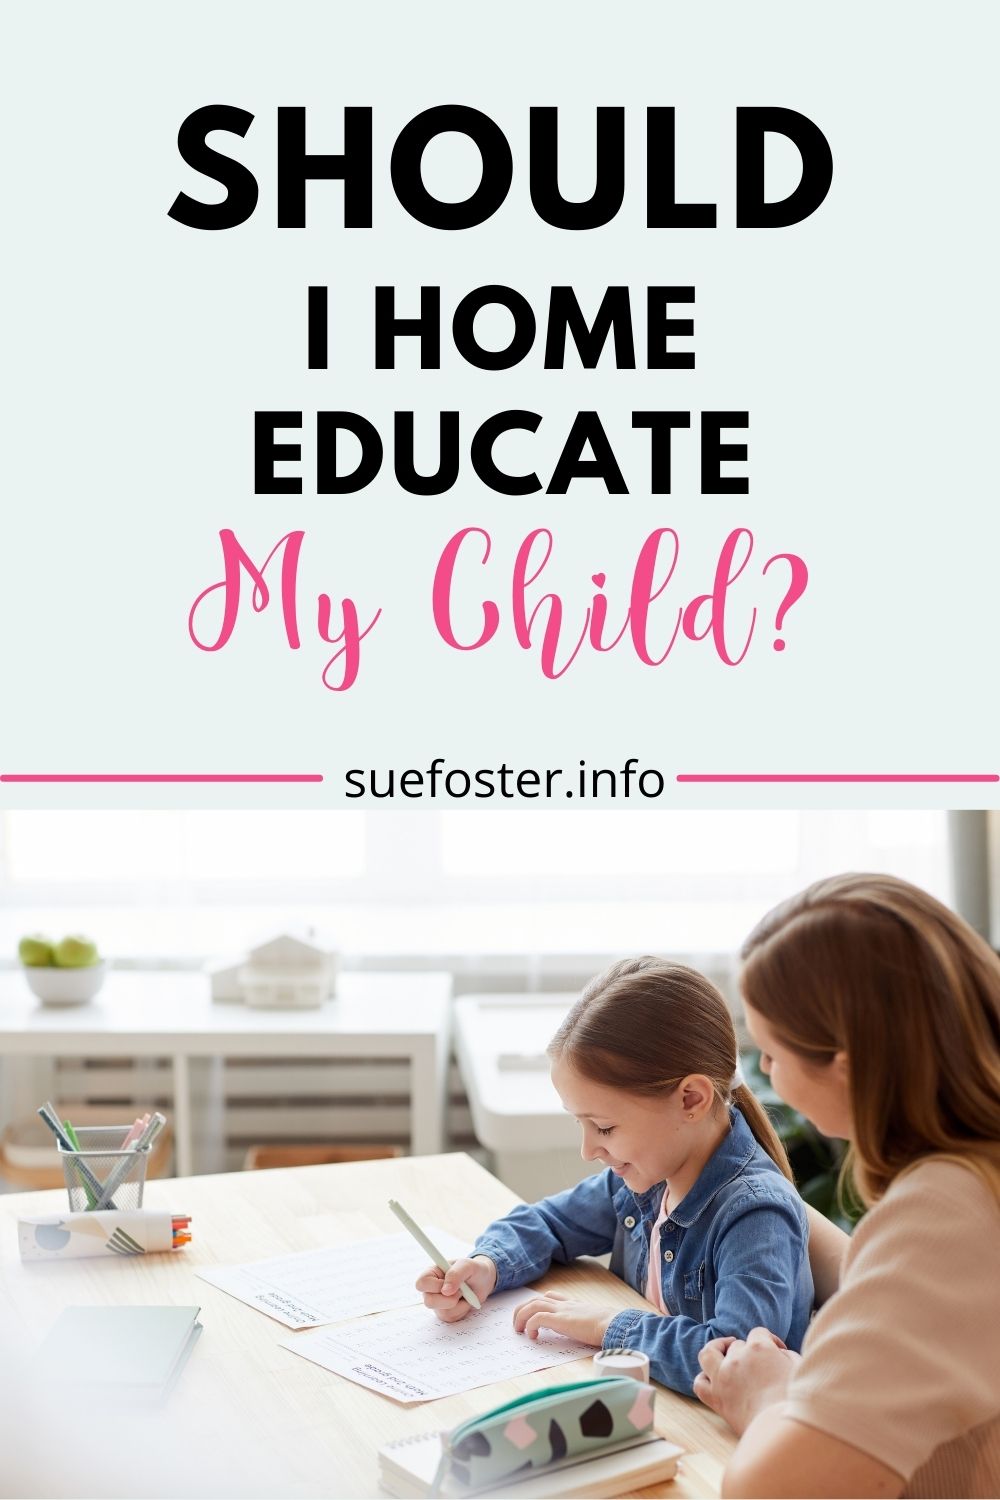 Should I home educate my child? Here are some facts to help you make a decision.